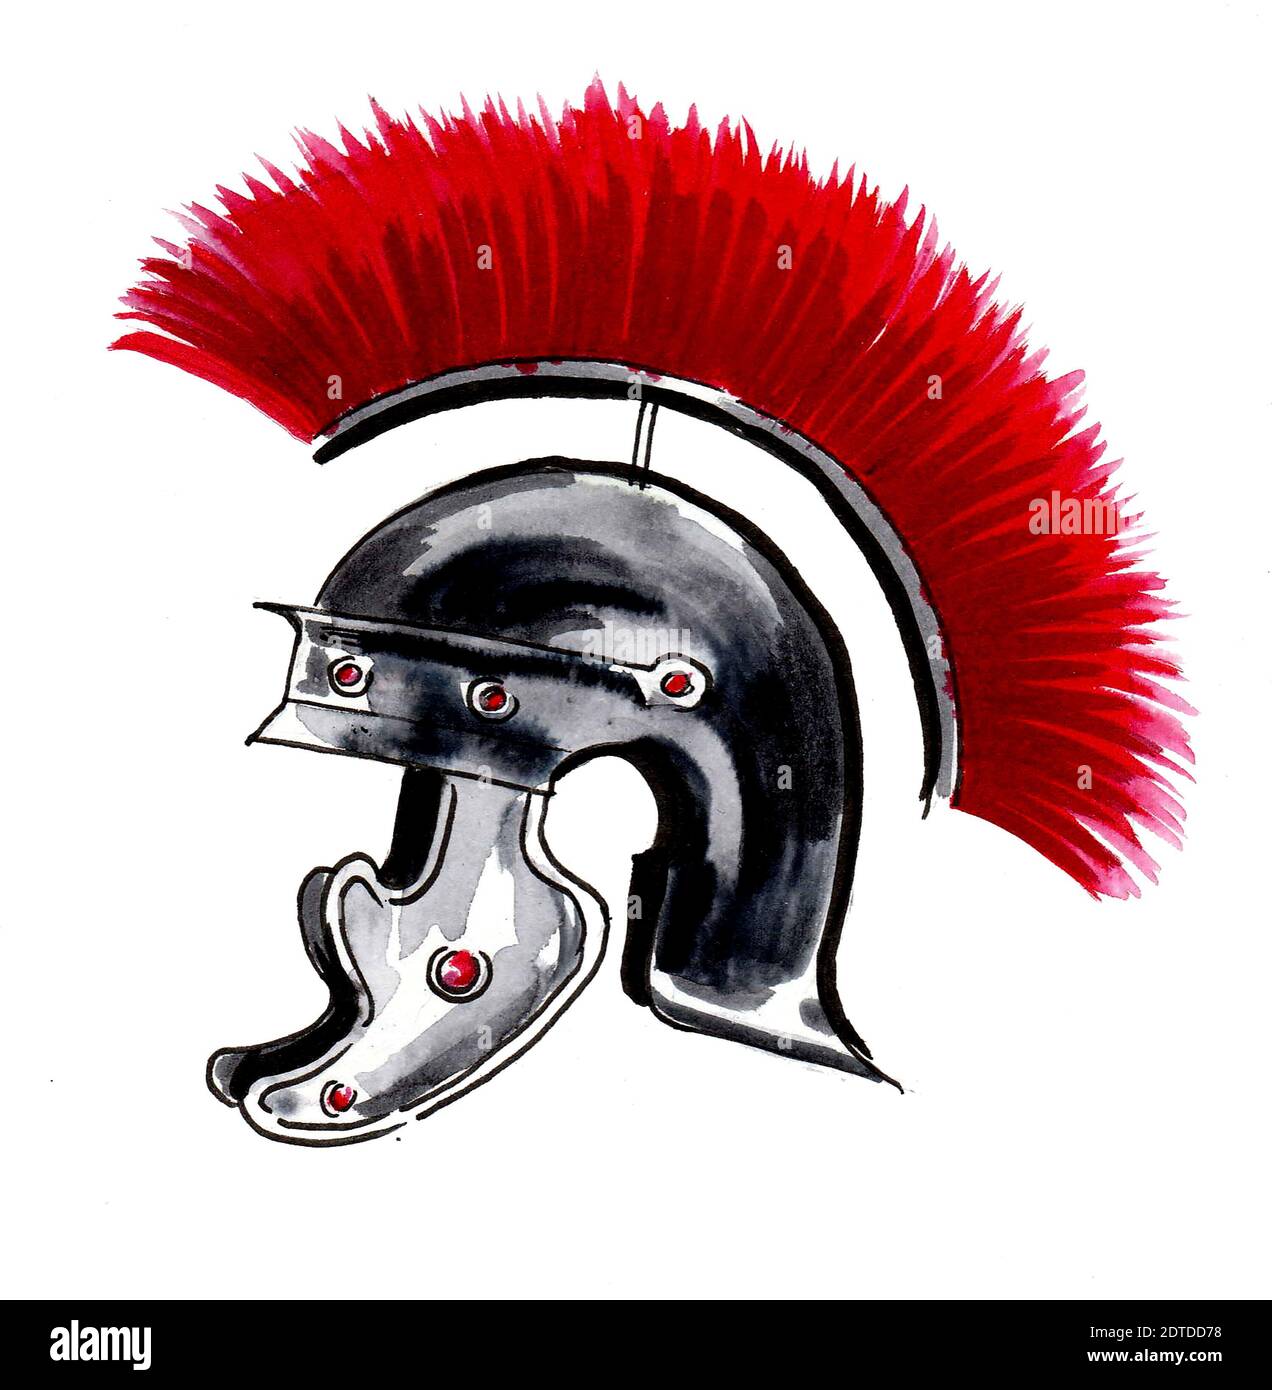 Ancient Roman helmet. Ink and watercolor drawing Stock Photo